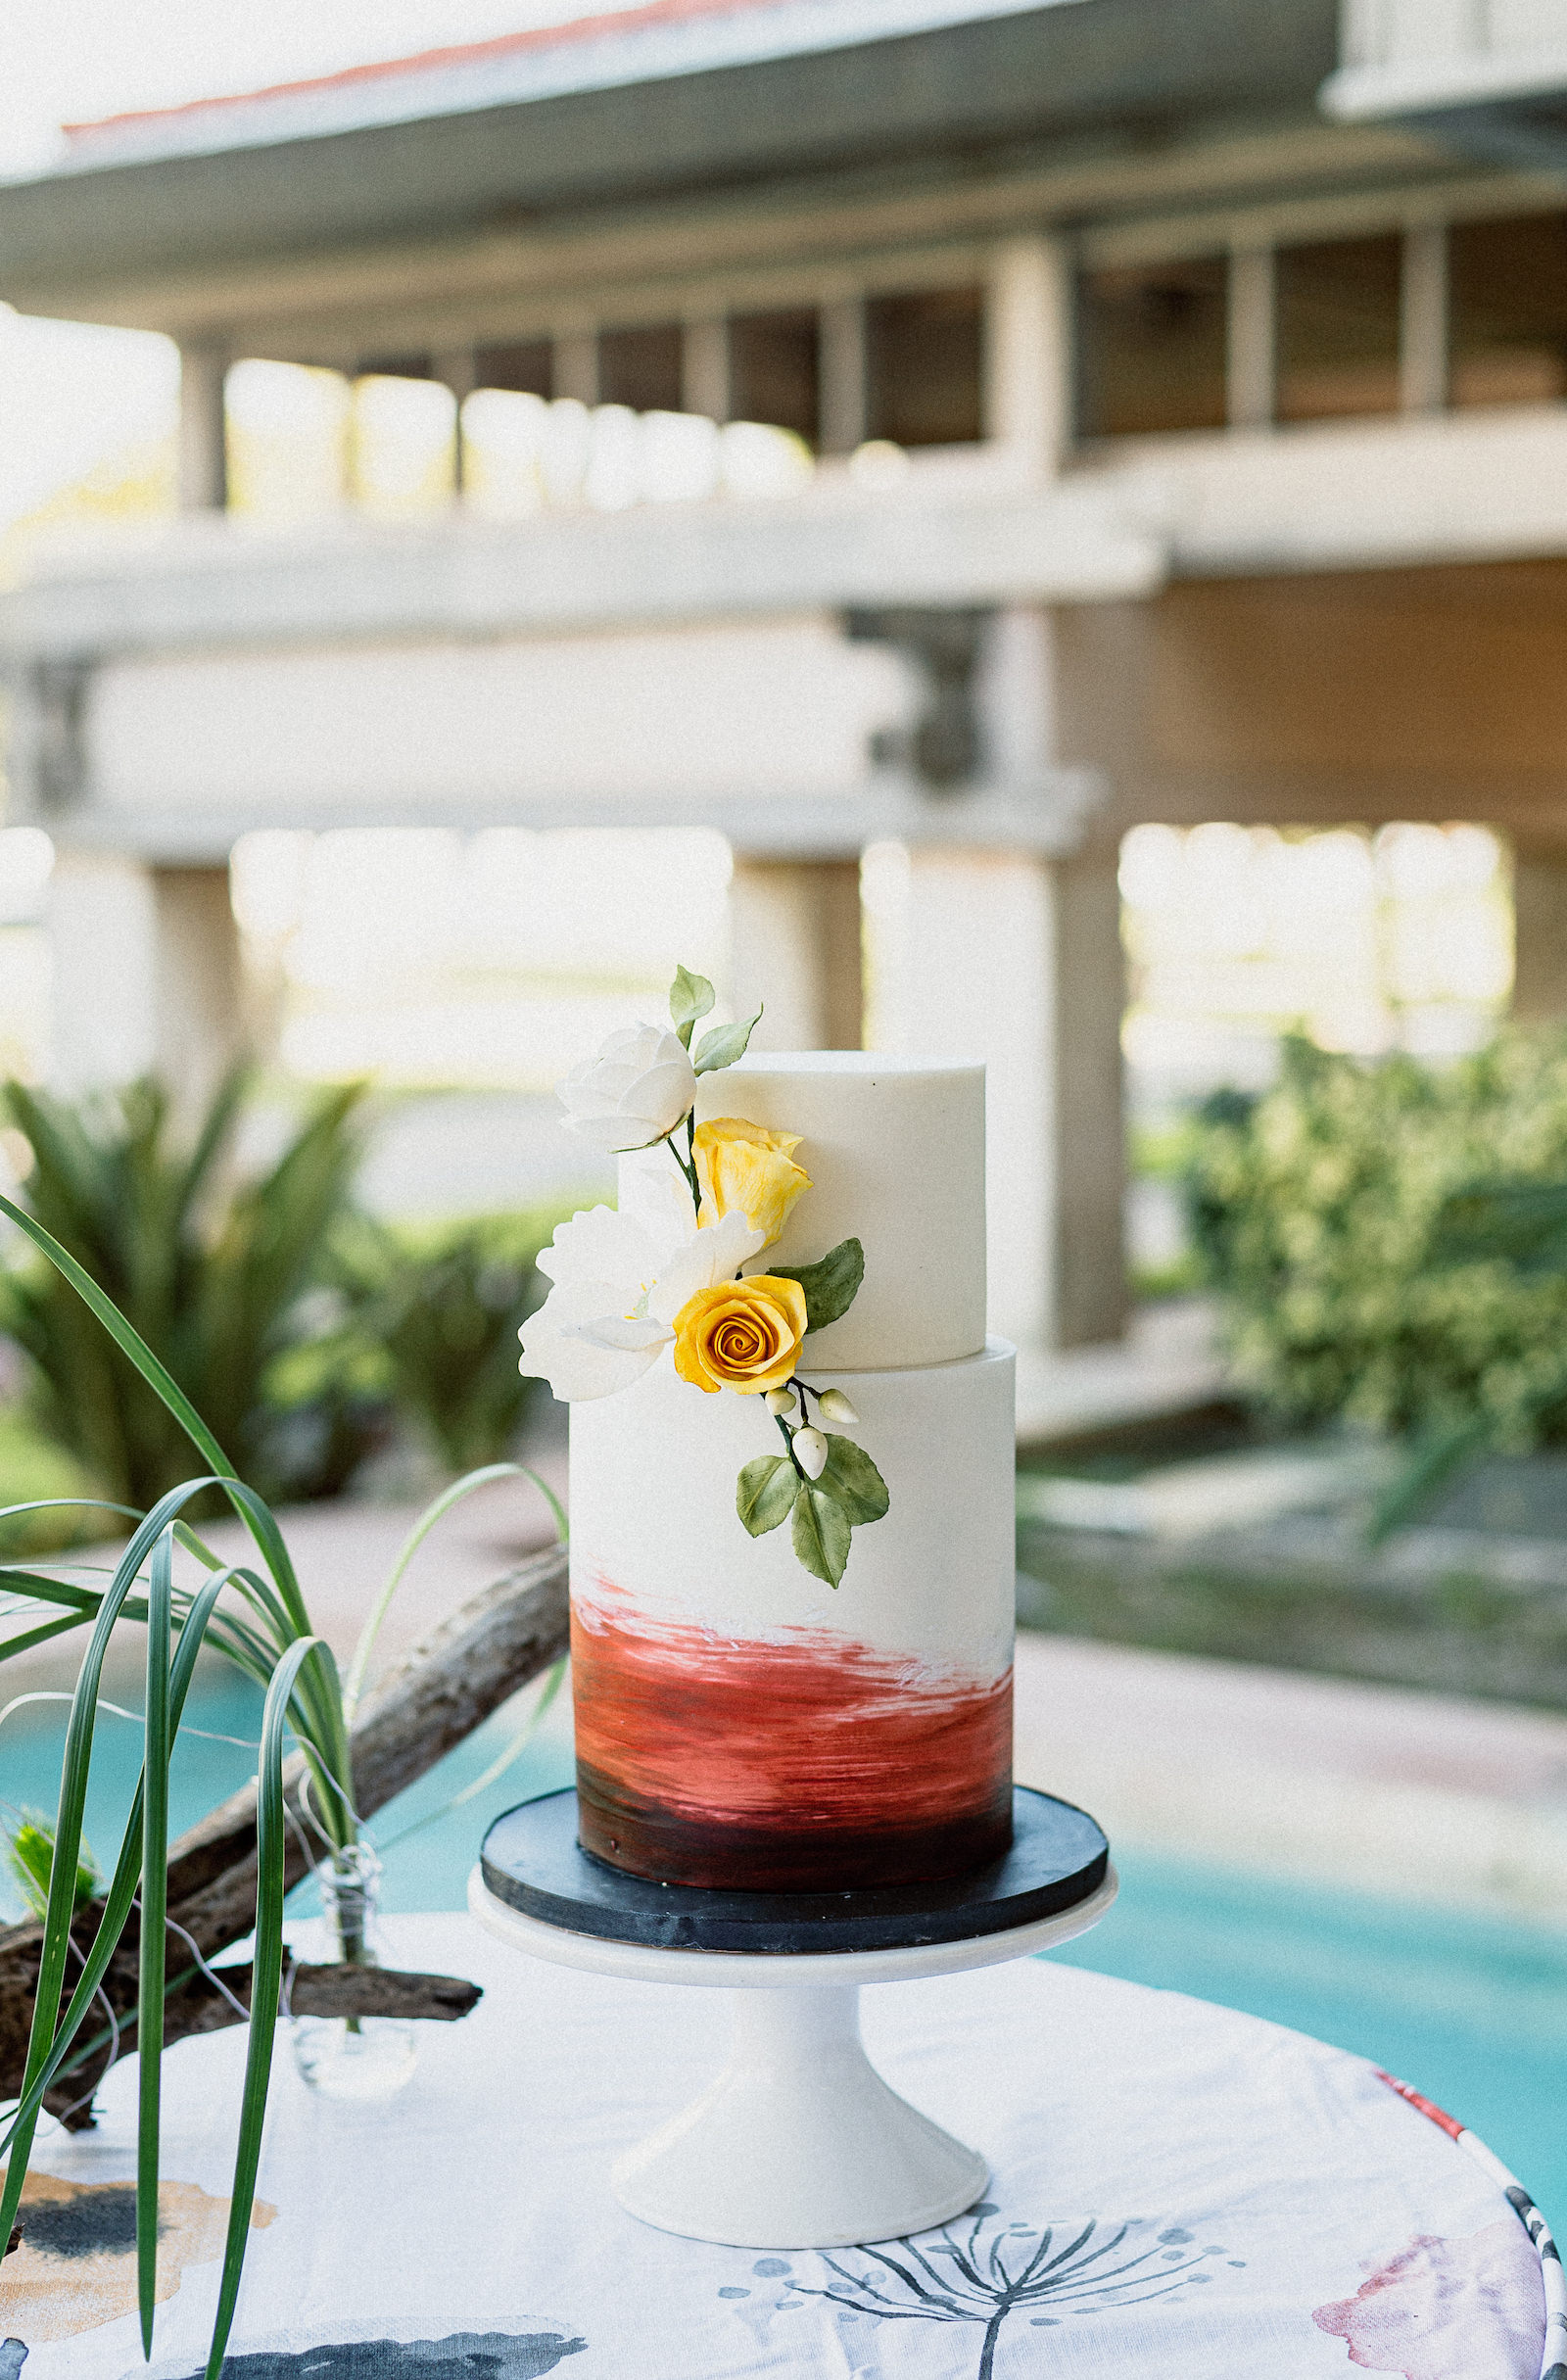 Unique Wedding Cake by Tampa Bay Cake Company | Black and White Wedding with Maroon Burgundy and Gold | Watercolor Fondant Wedding Cake with Sugar Flower Roses at St. Pete Wedding Venue The Poynter Institute